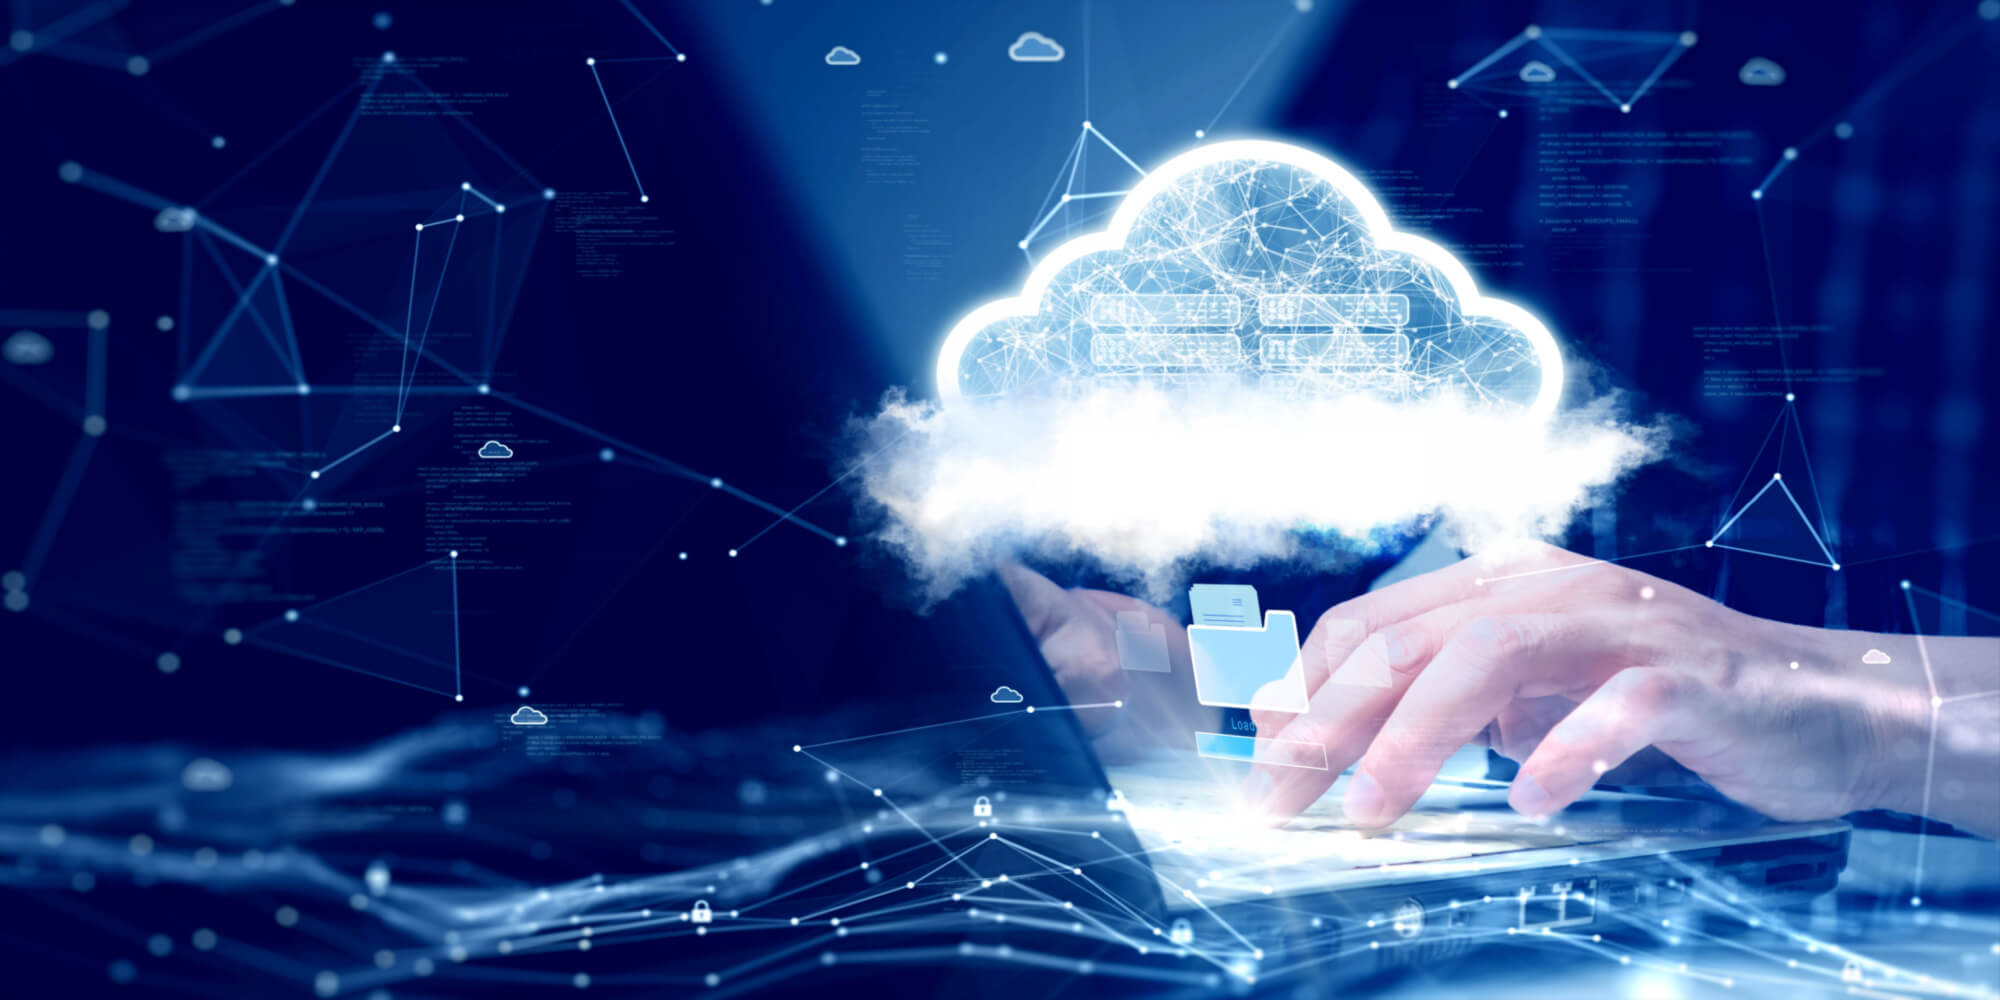 Factors to Consider When SMEs Migrate to the Cloud